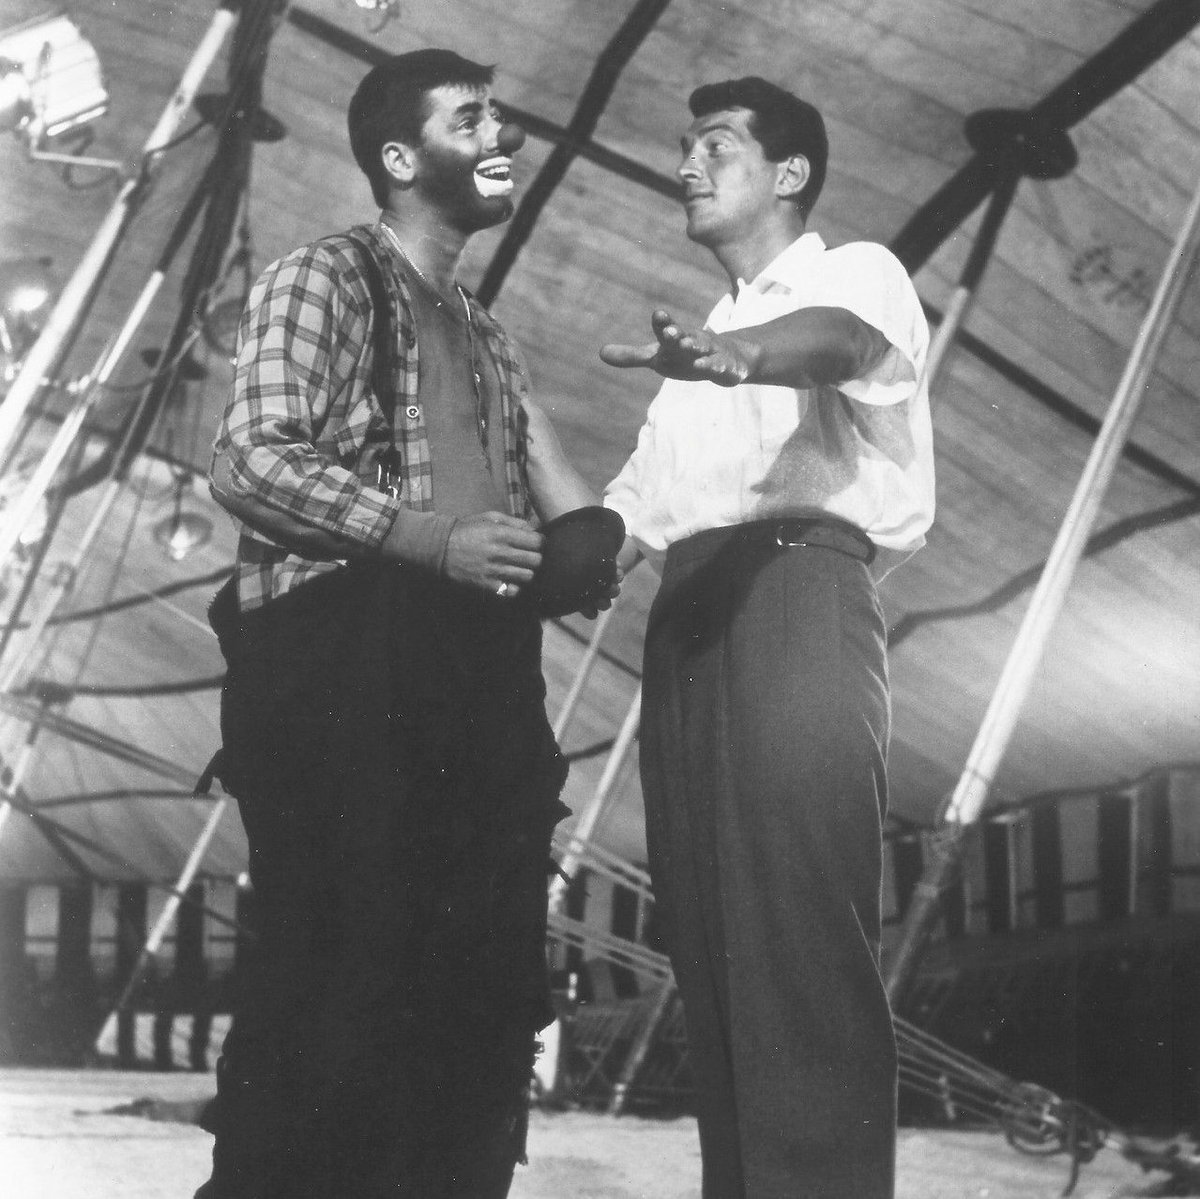 A Dean Martin & Jerry Lewis rarity in 35mm! Our final showing of 3 RING CIRCUS (1954) plays tomorrow, Sunday May 19th, at 10:00am.